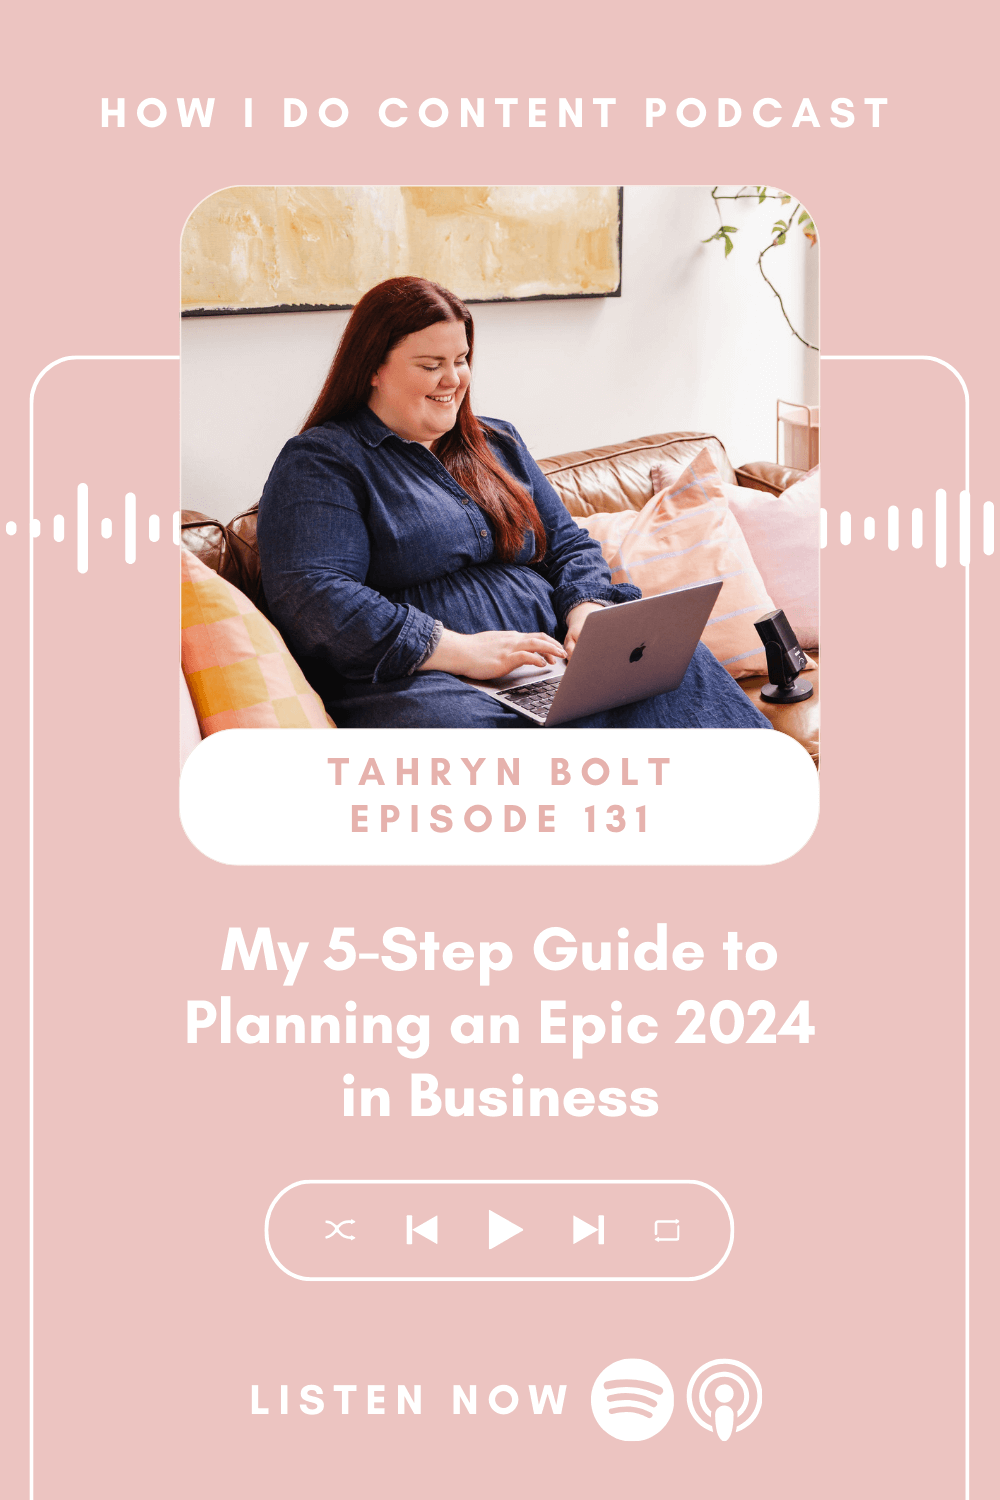 My 5-Step Guide to Planning an Epic 2024 in Business